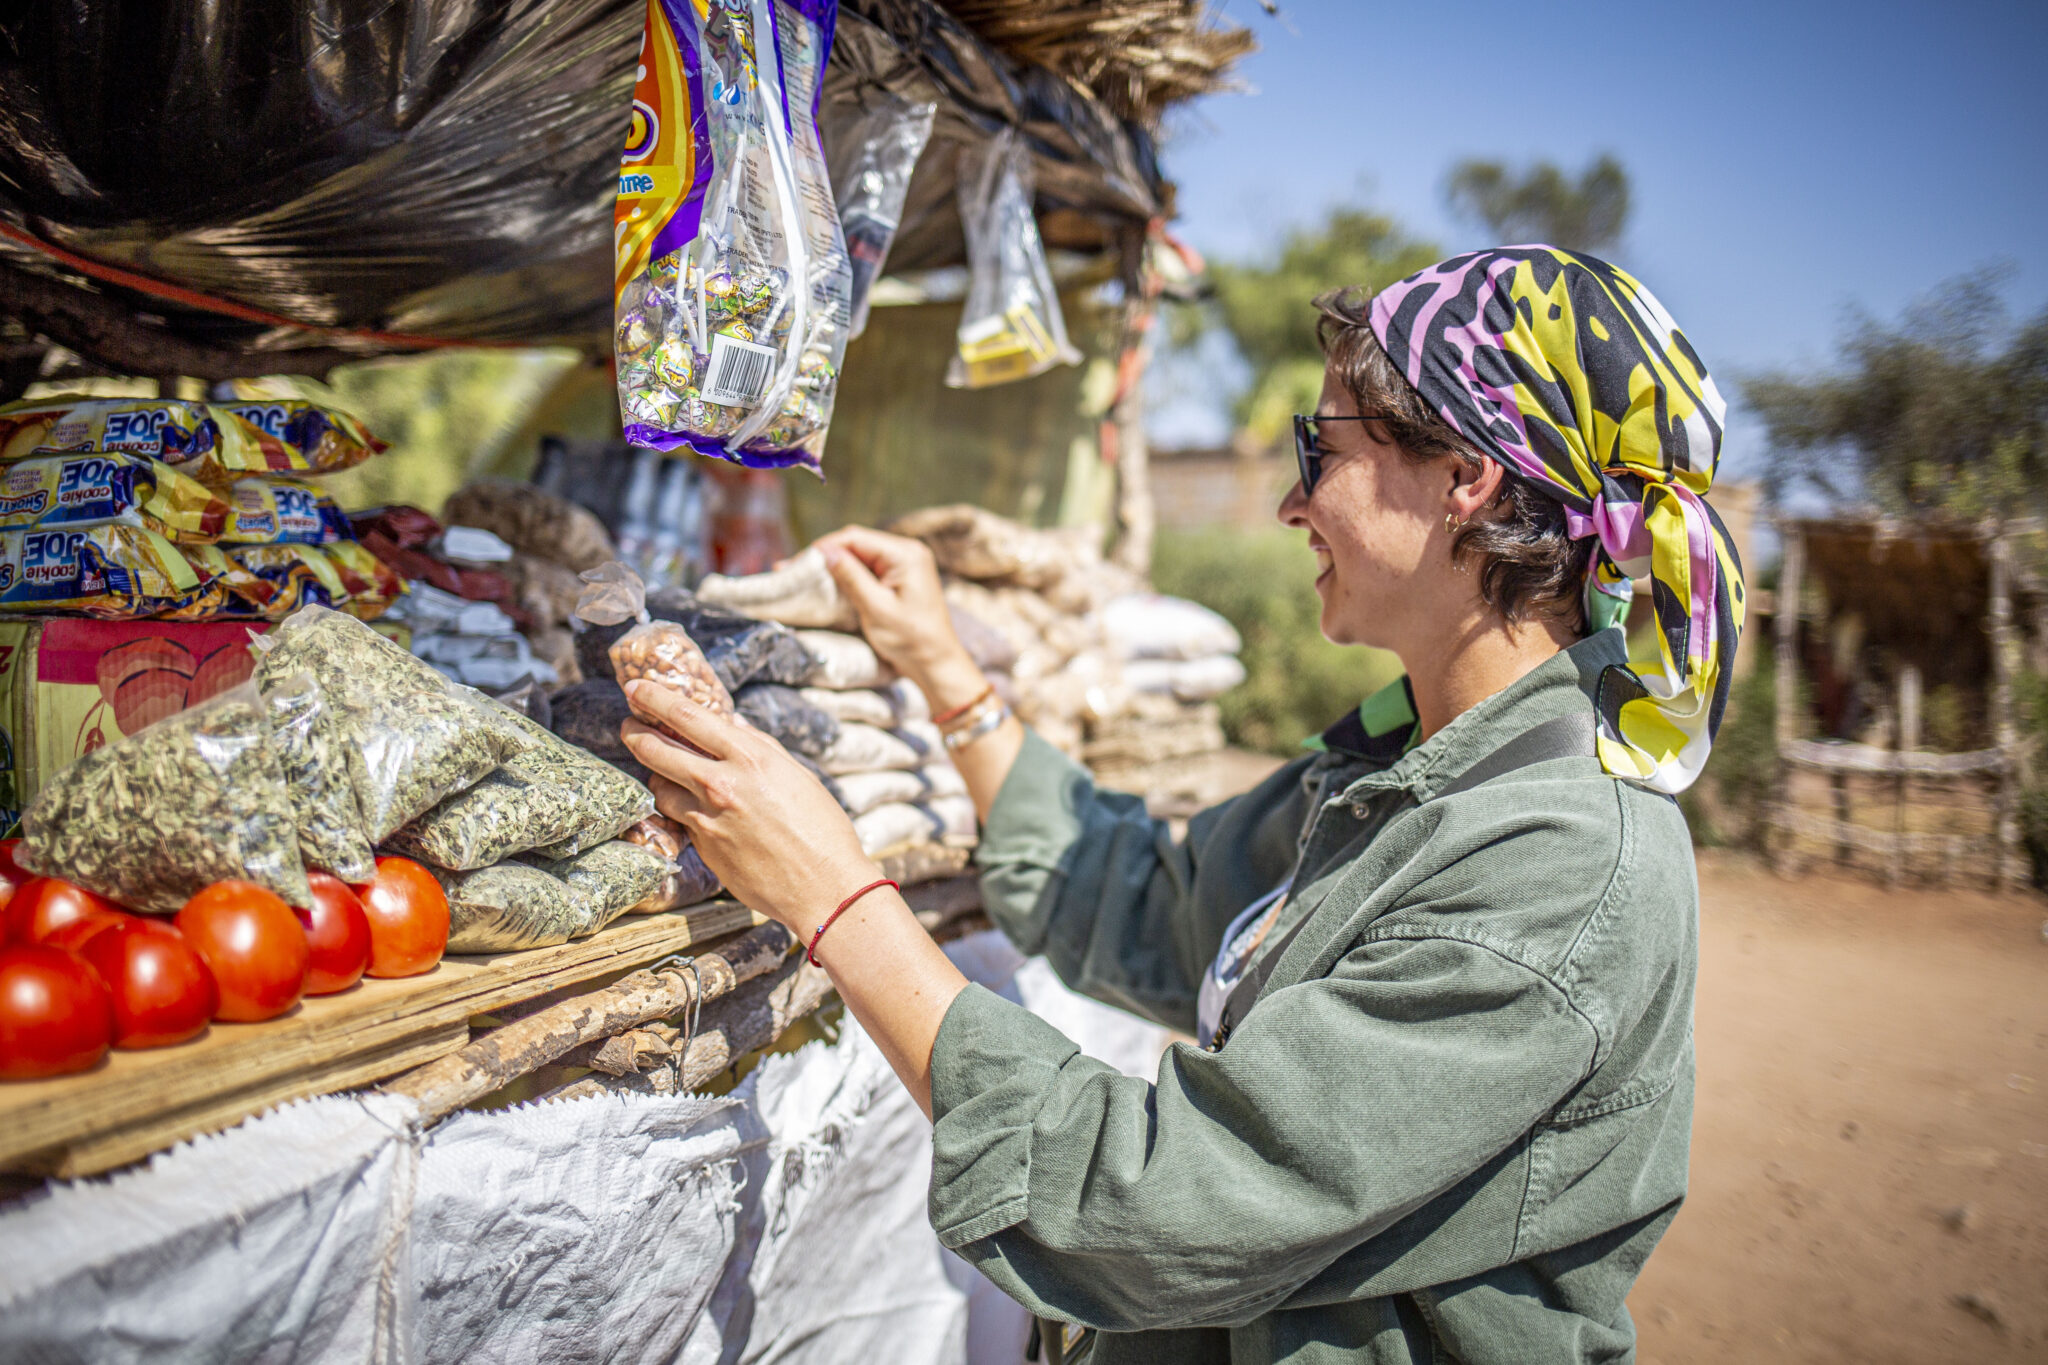 A woman in a colorful headscarf looking at the goods at a small roadside stall